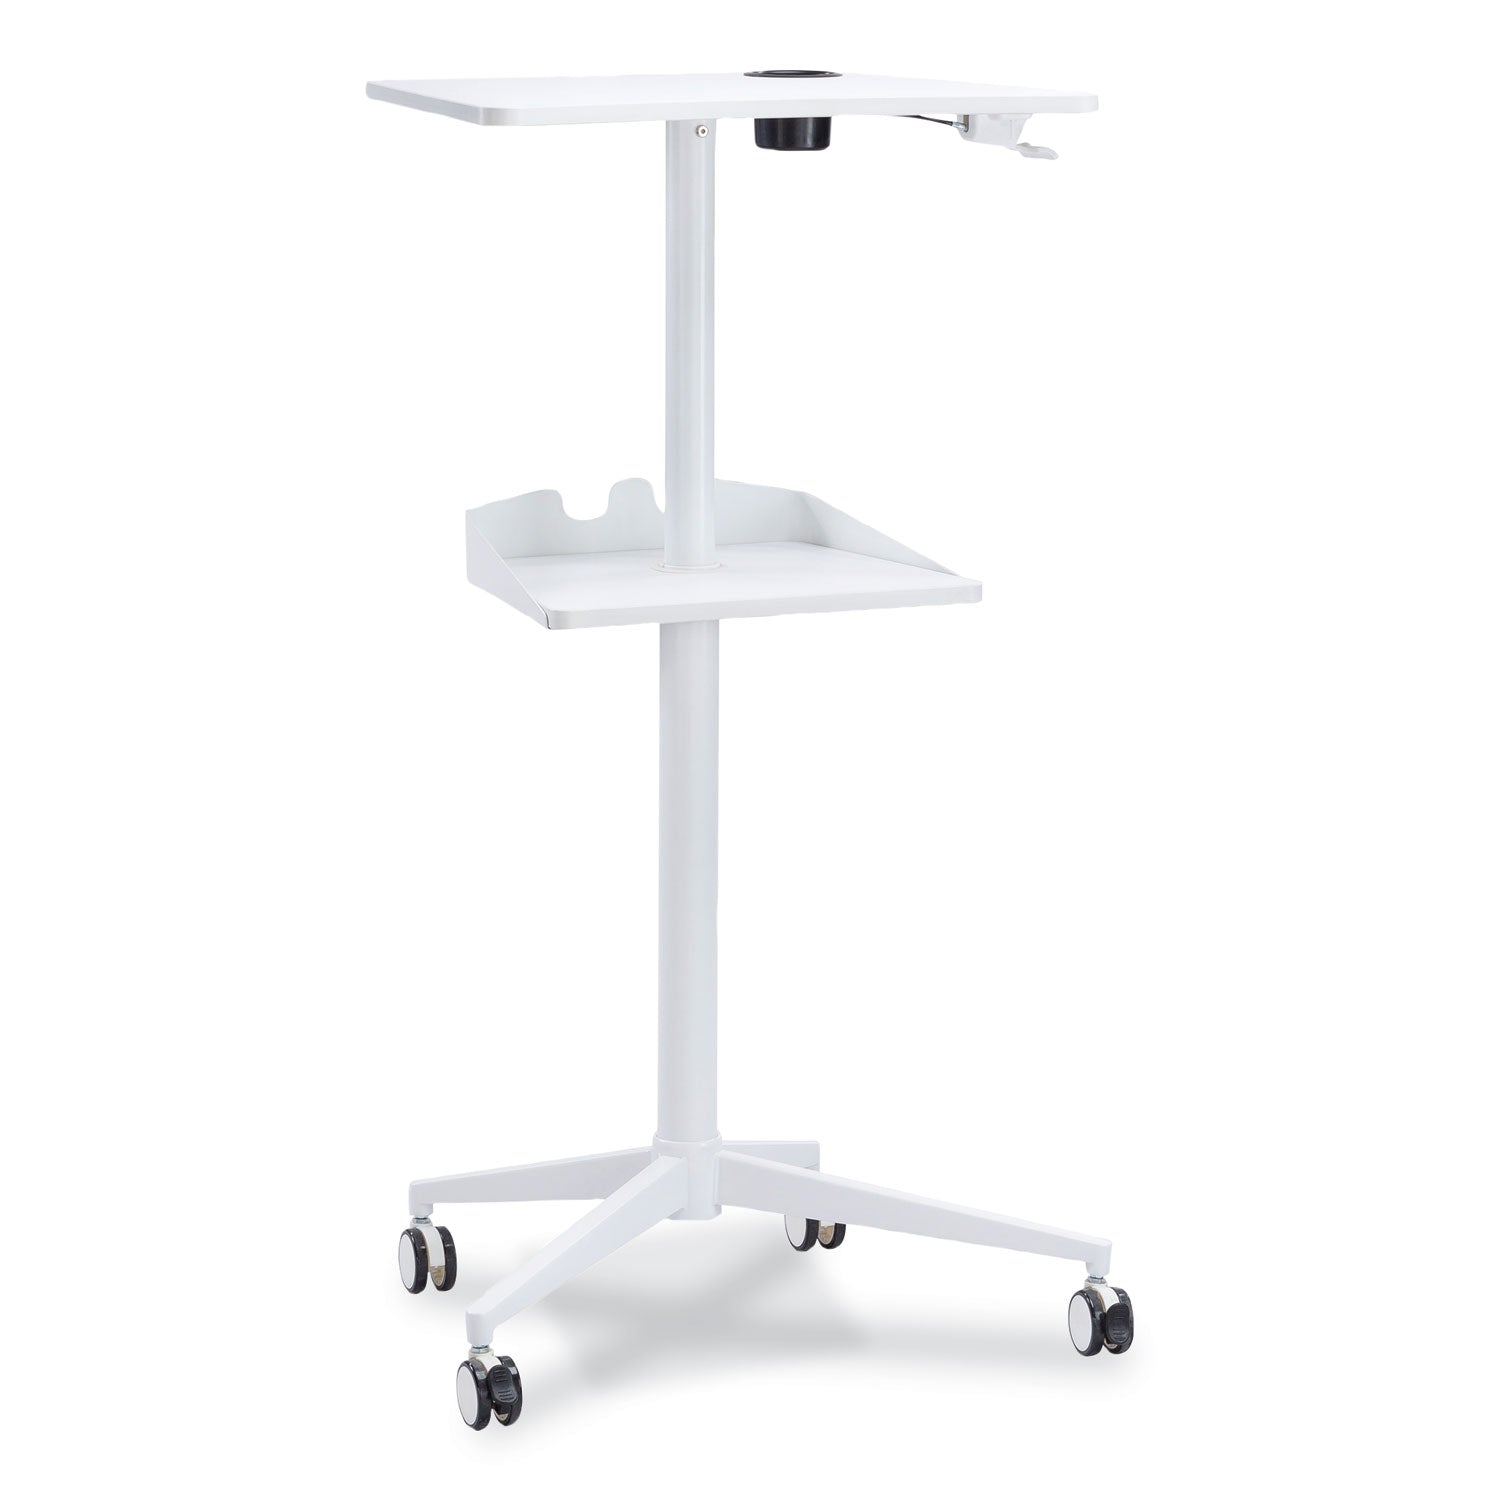 Safco Active Collection Vum Mobile Workstation - 25.3" x 19.8"47.8" - 2 Shelve(s) - Finish: White - 2